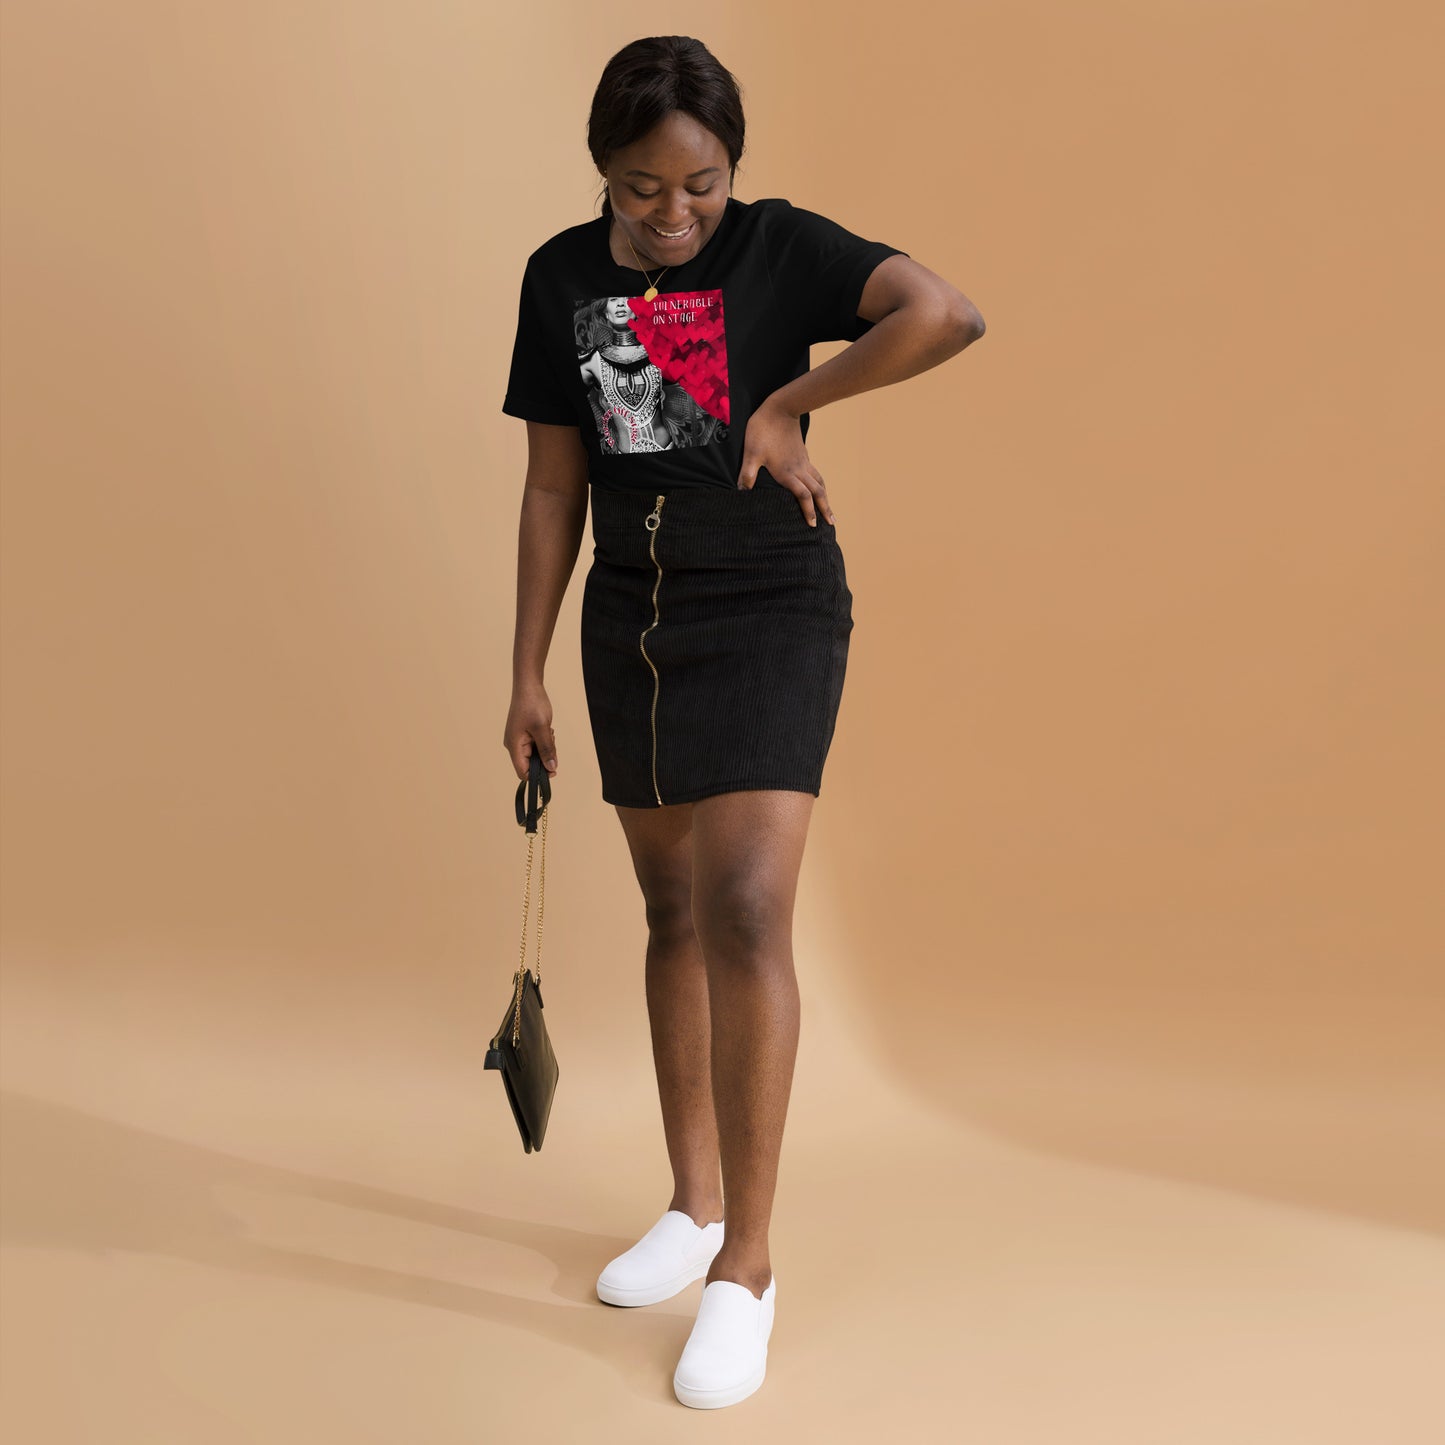 A bold and stylish Unisex Artist Vulnerable Warrior T-Shirt in Classic design, specifically crafted for Black Female Artists (BFA). The shirt features empowering graphics, celebrating authenticity on stage and fierce warrior strength off stage. Perfect for making a statement in the world of art and beyond.